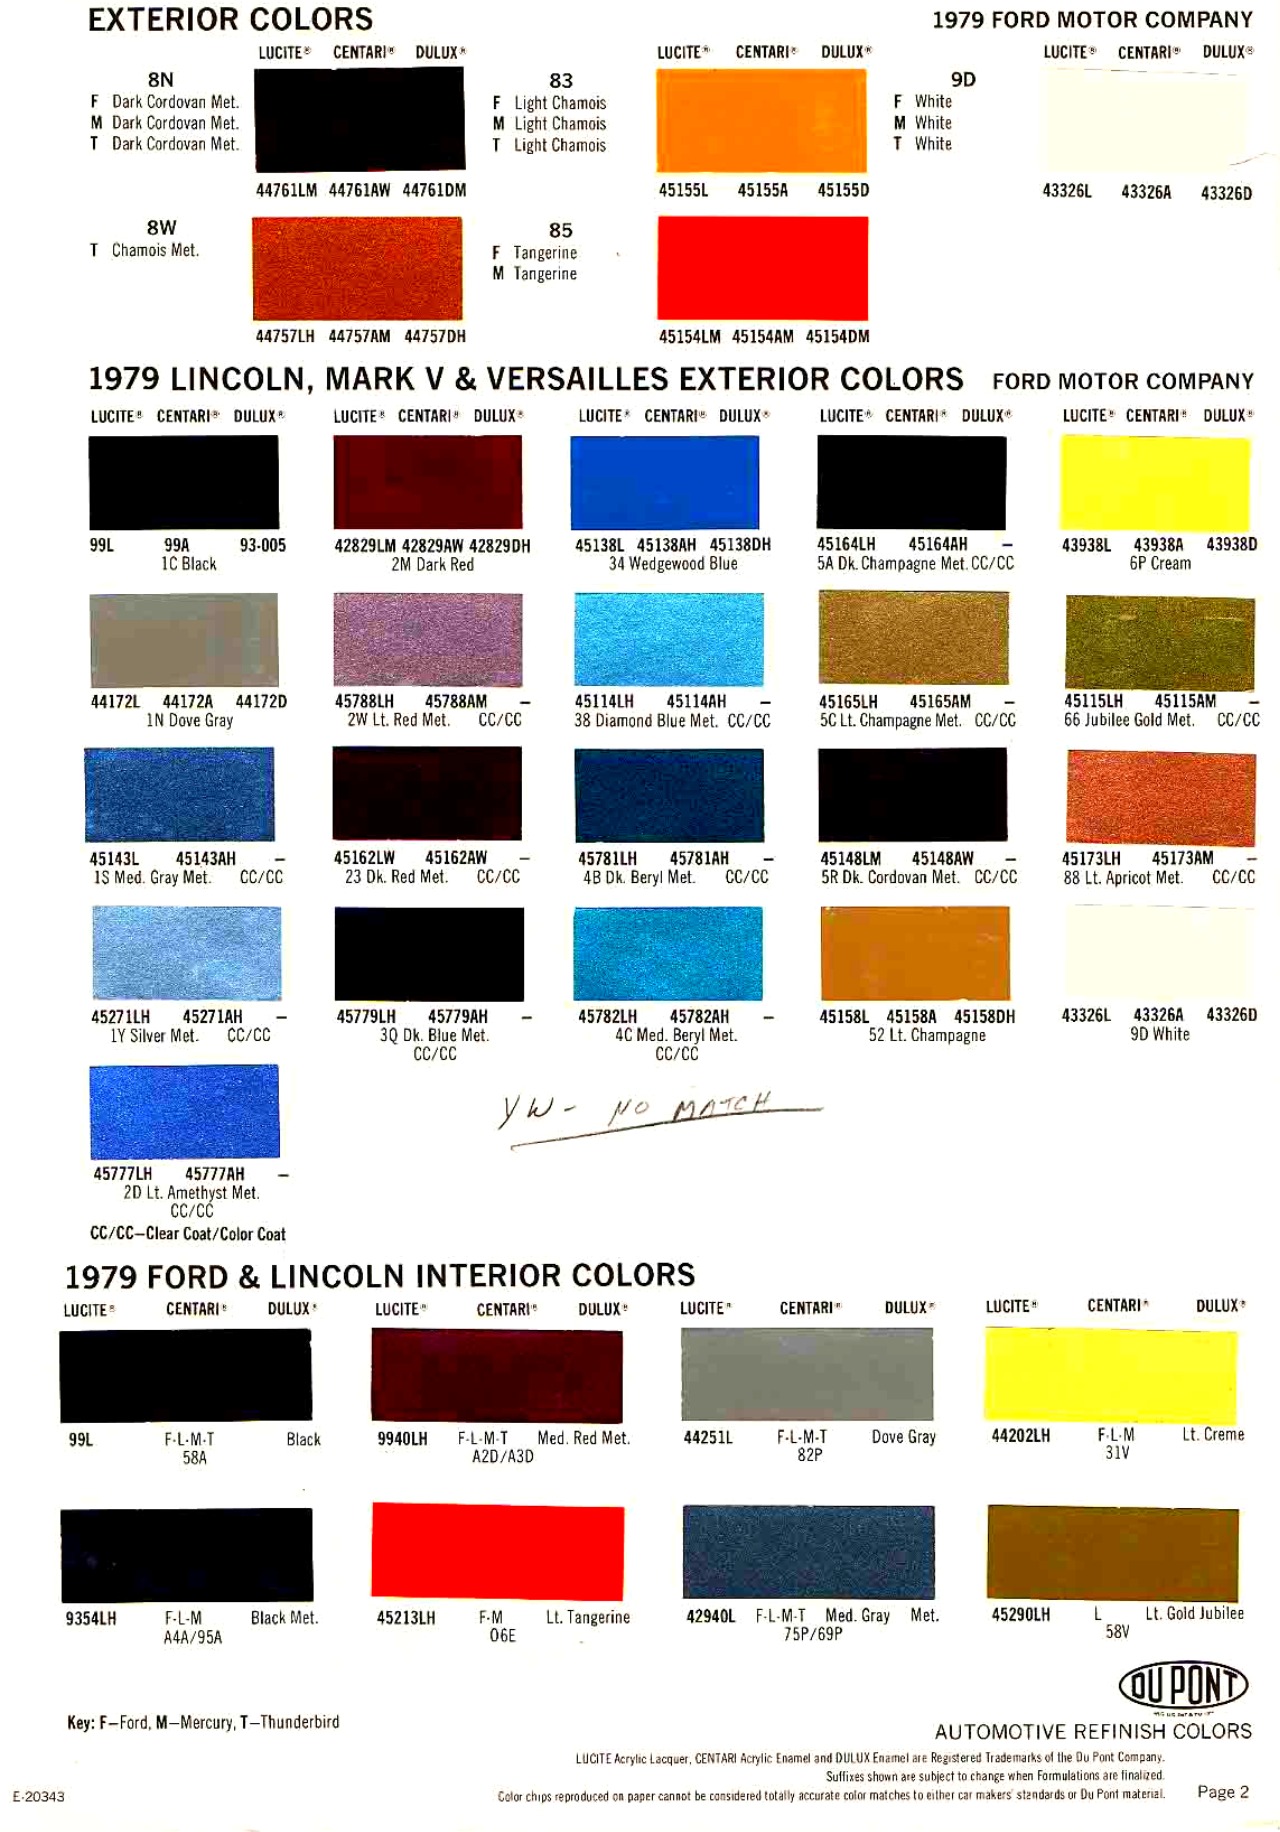 1979 Ford Motor Company paint codes, color swatches, and mixing stock numbers for repair of the vehicles